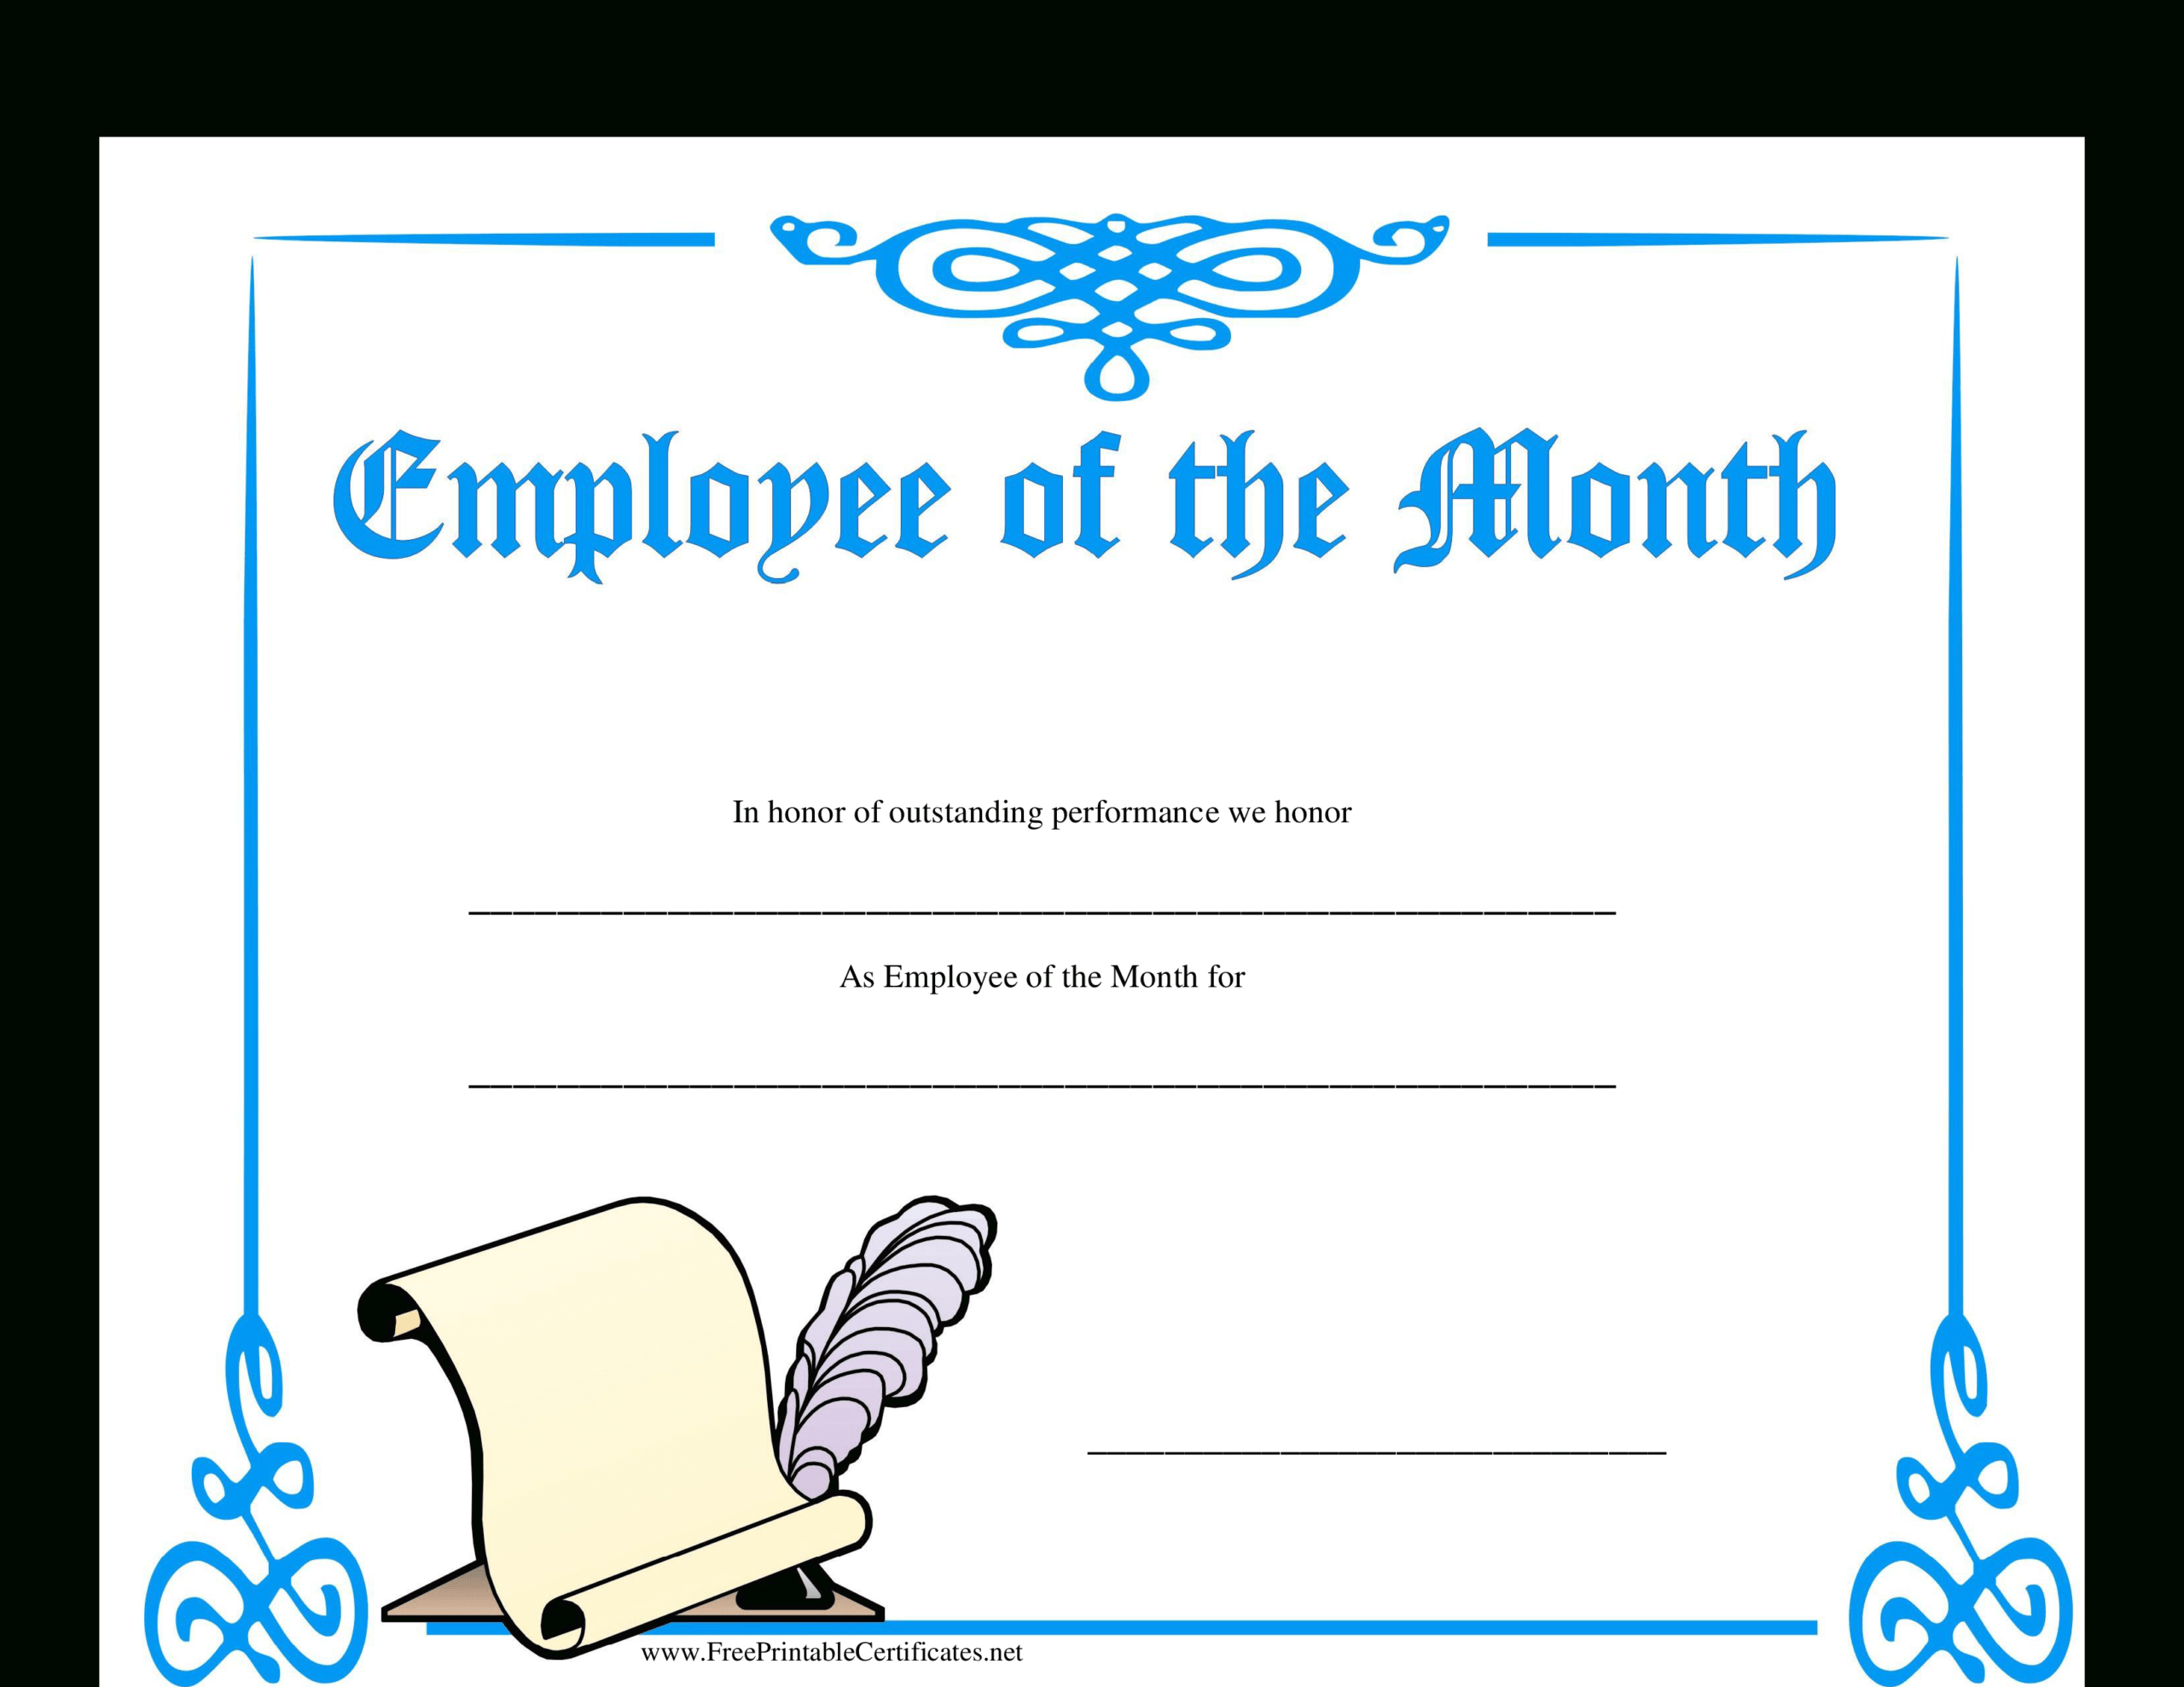 Employee Of The Month Certificate | Templates At For Employee Of The Month Certificate Template